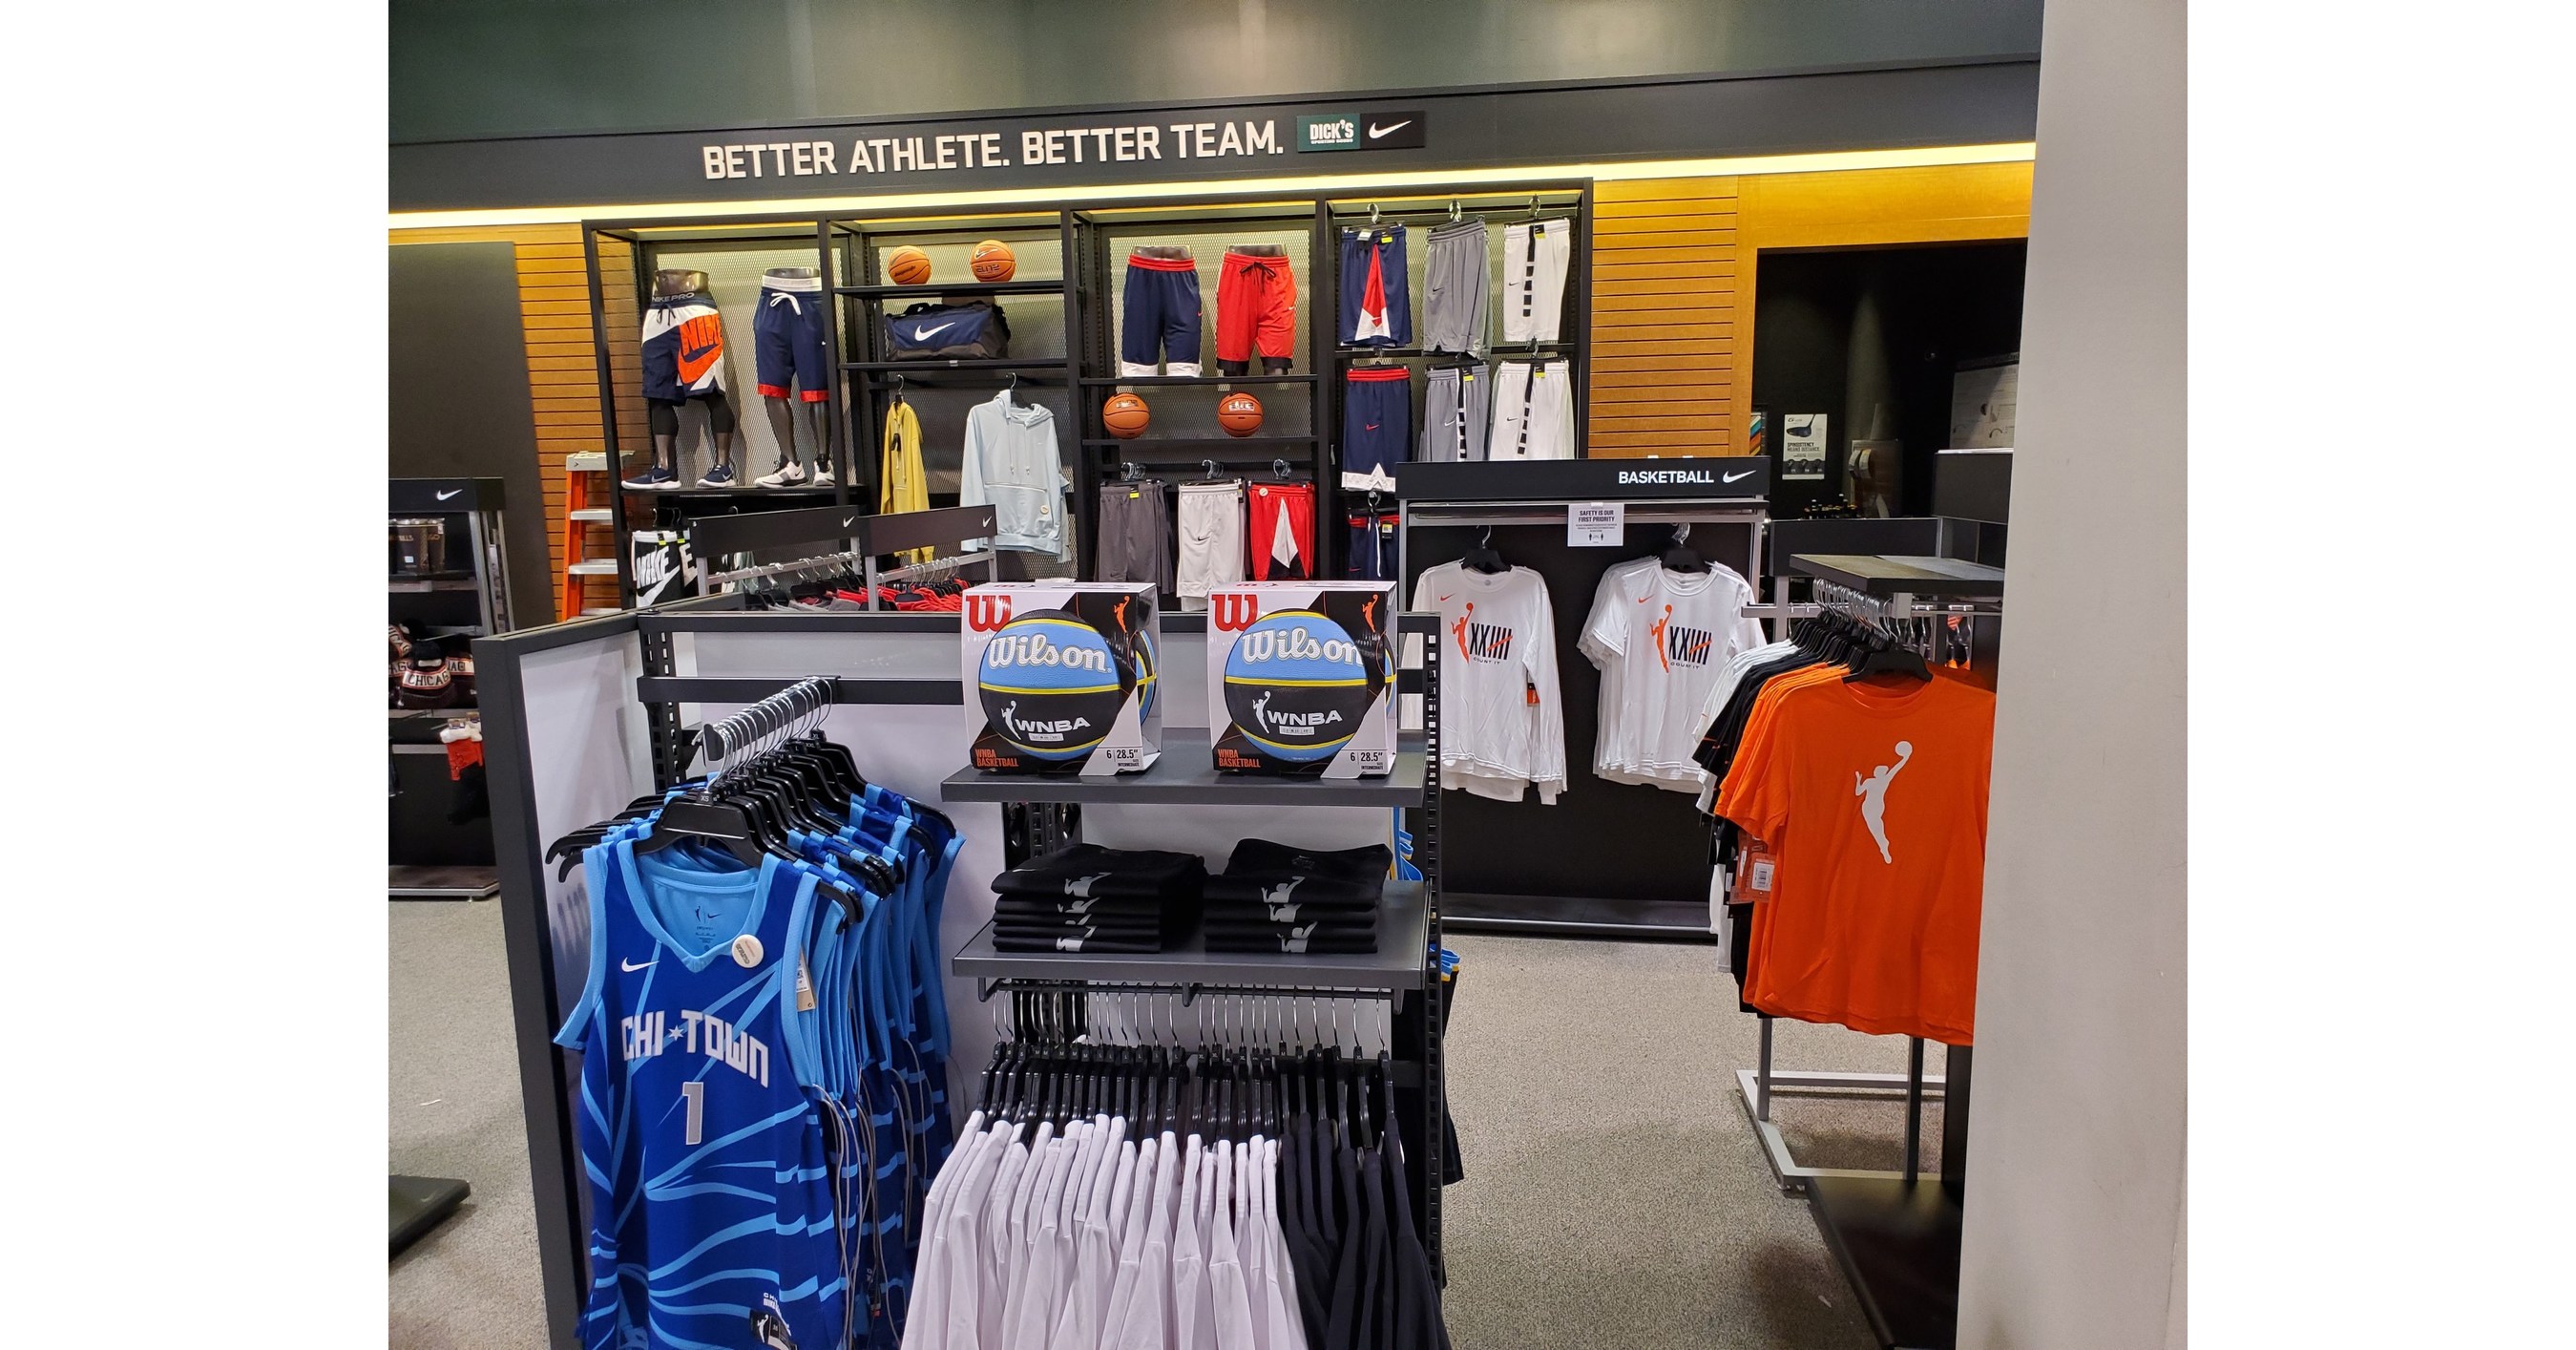 Officially Licensed Team Sports Apparel - Concepts Sport - United